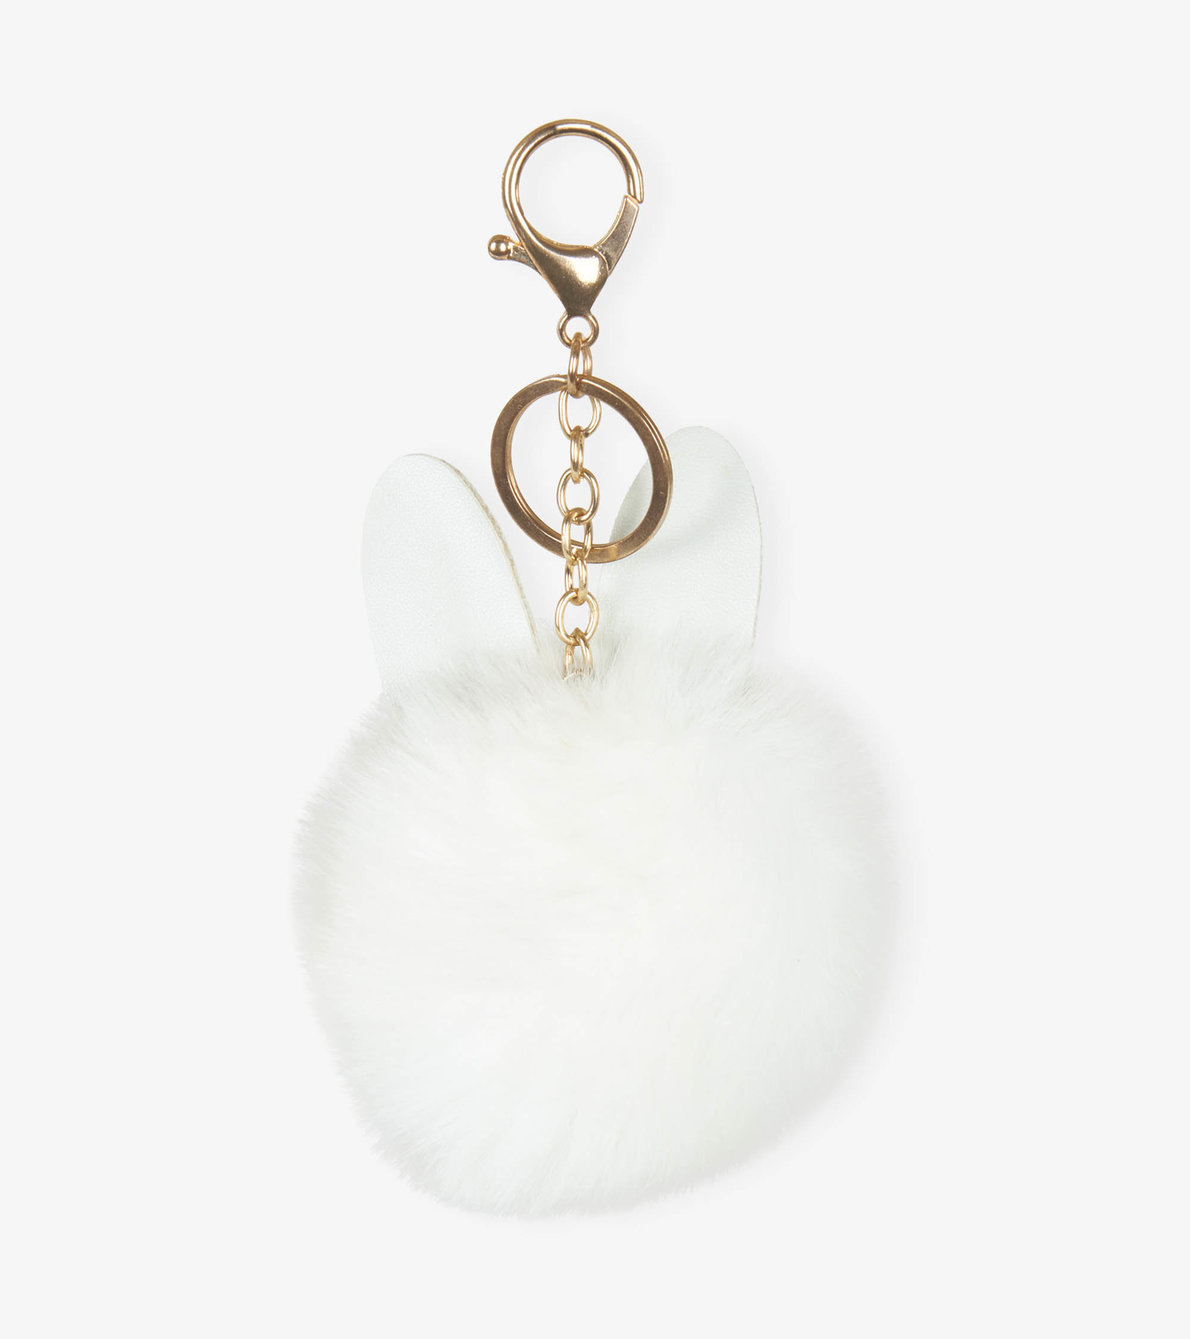 View larger image of Pom Pom Kitty Bag Charm